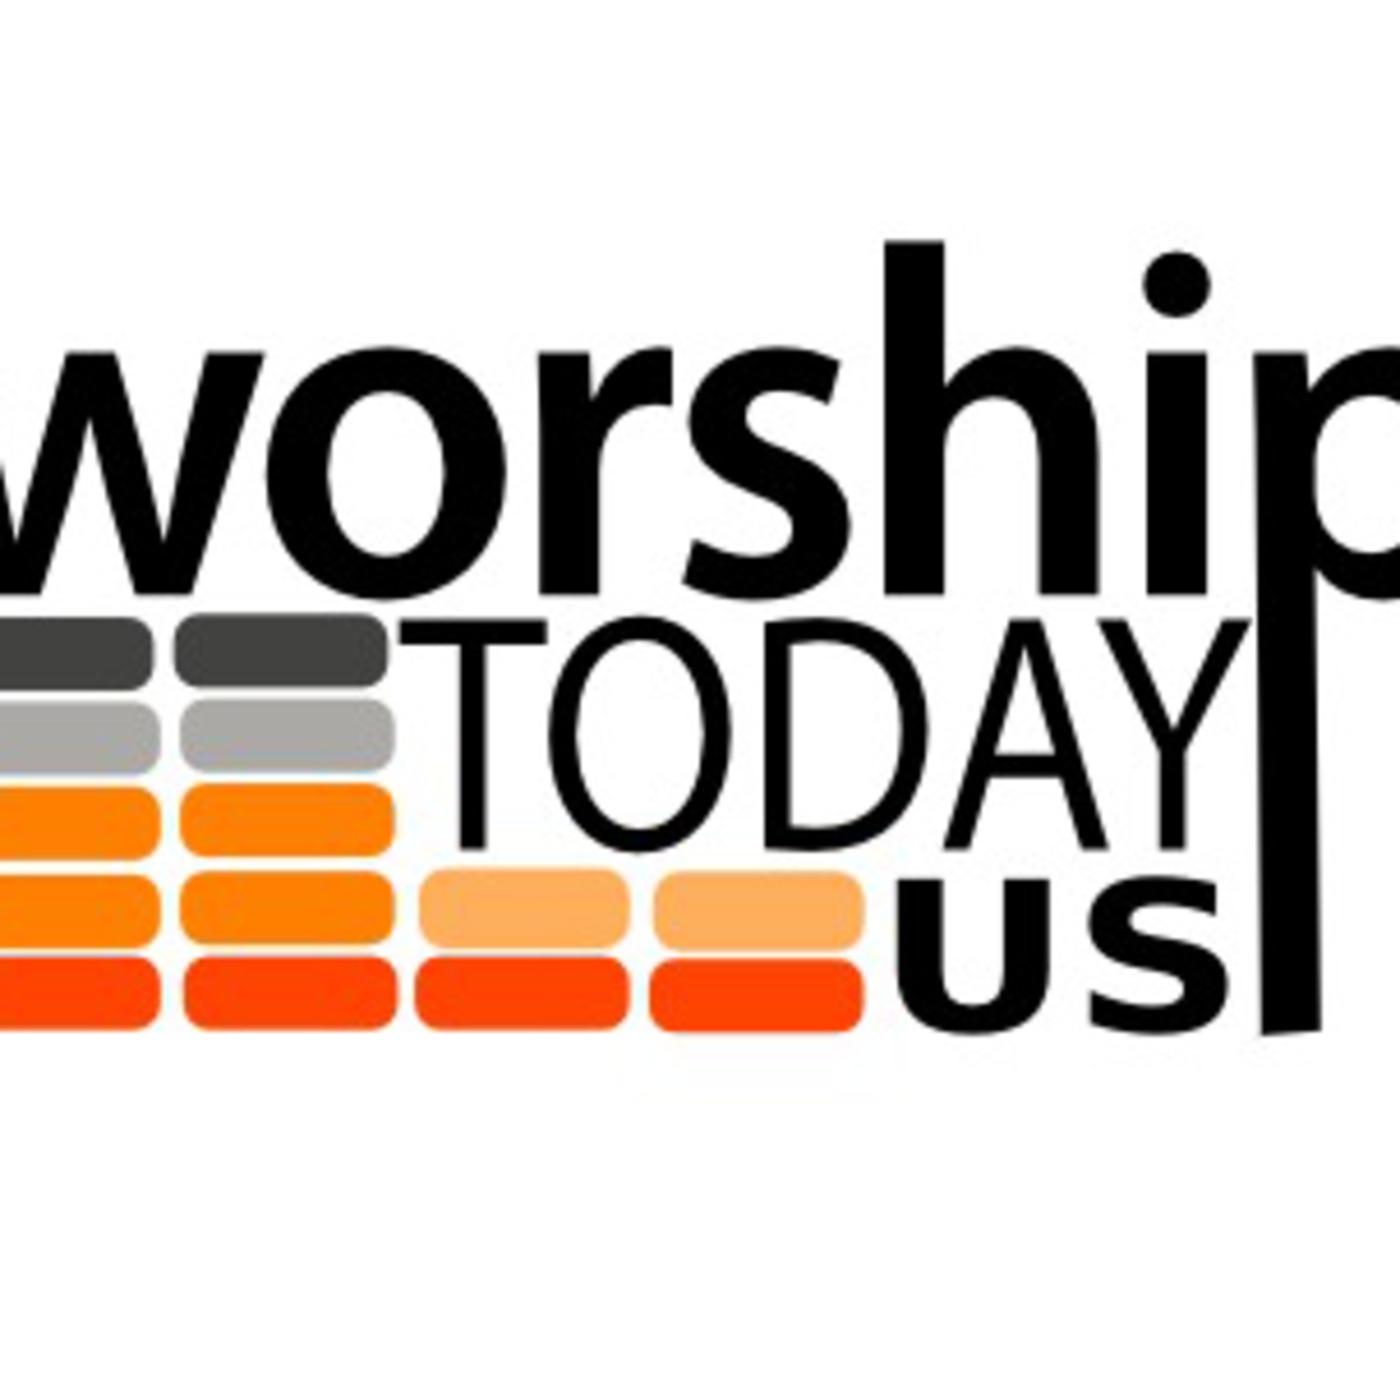 Worship Today Podcast